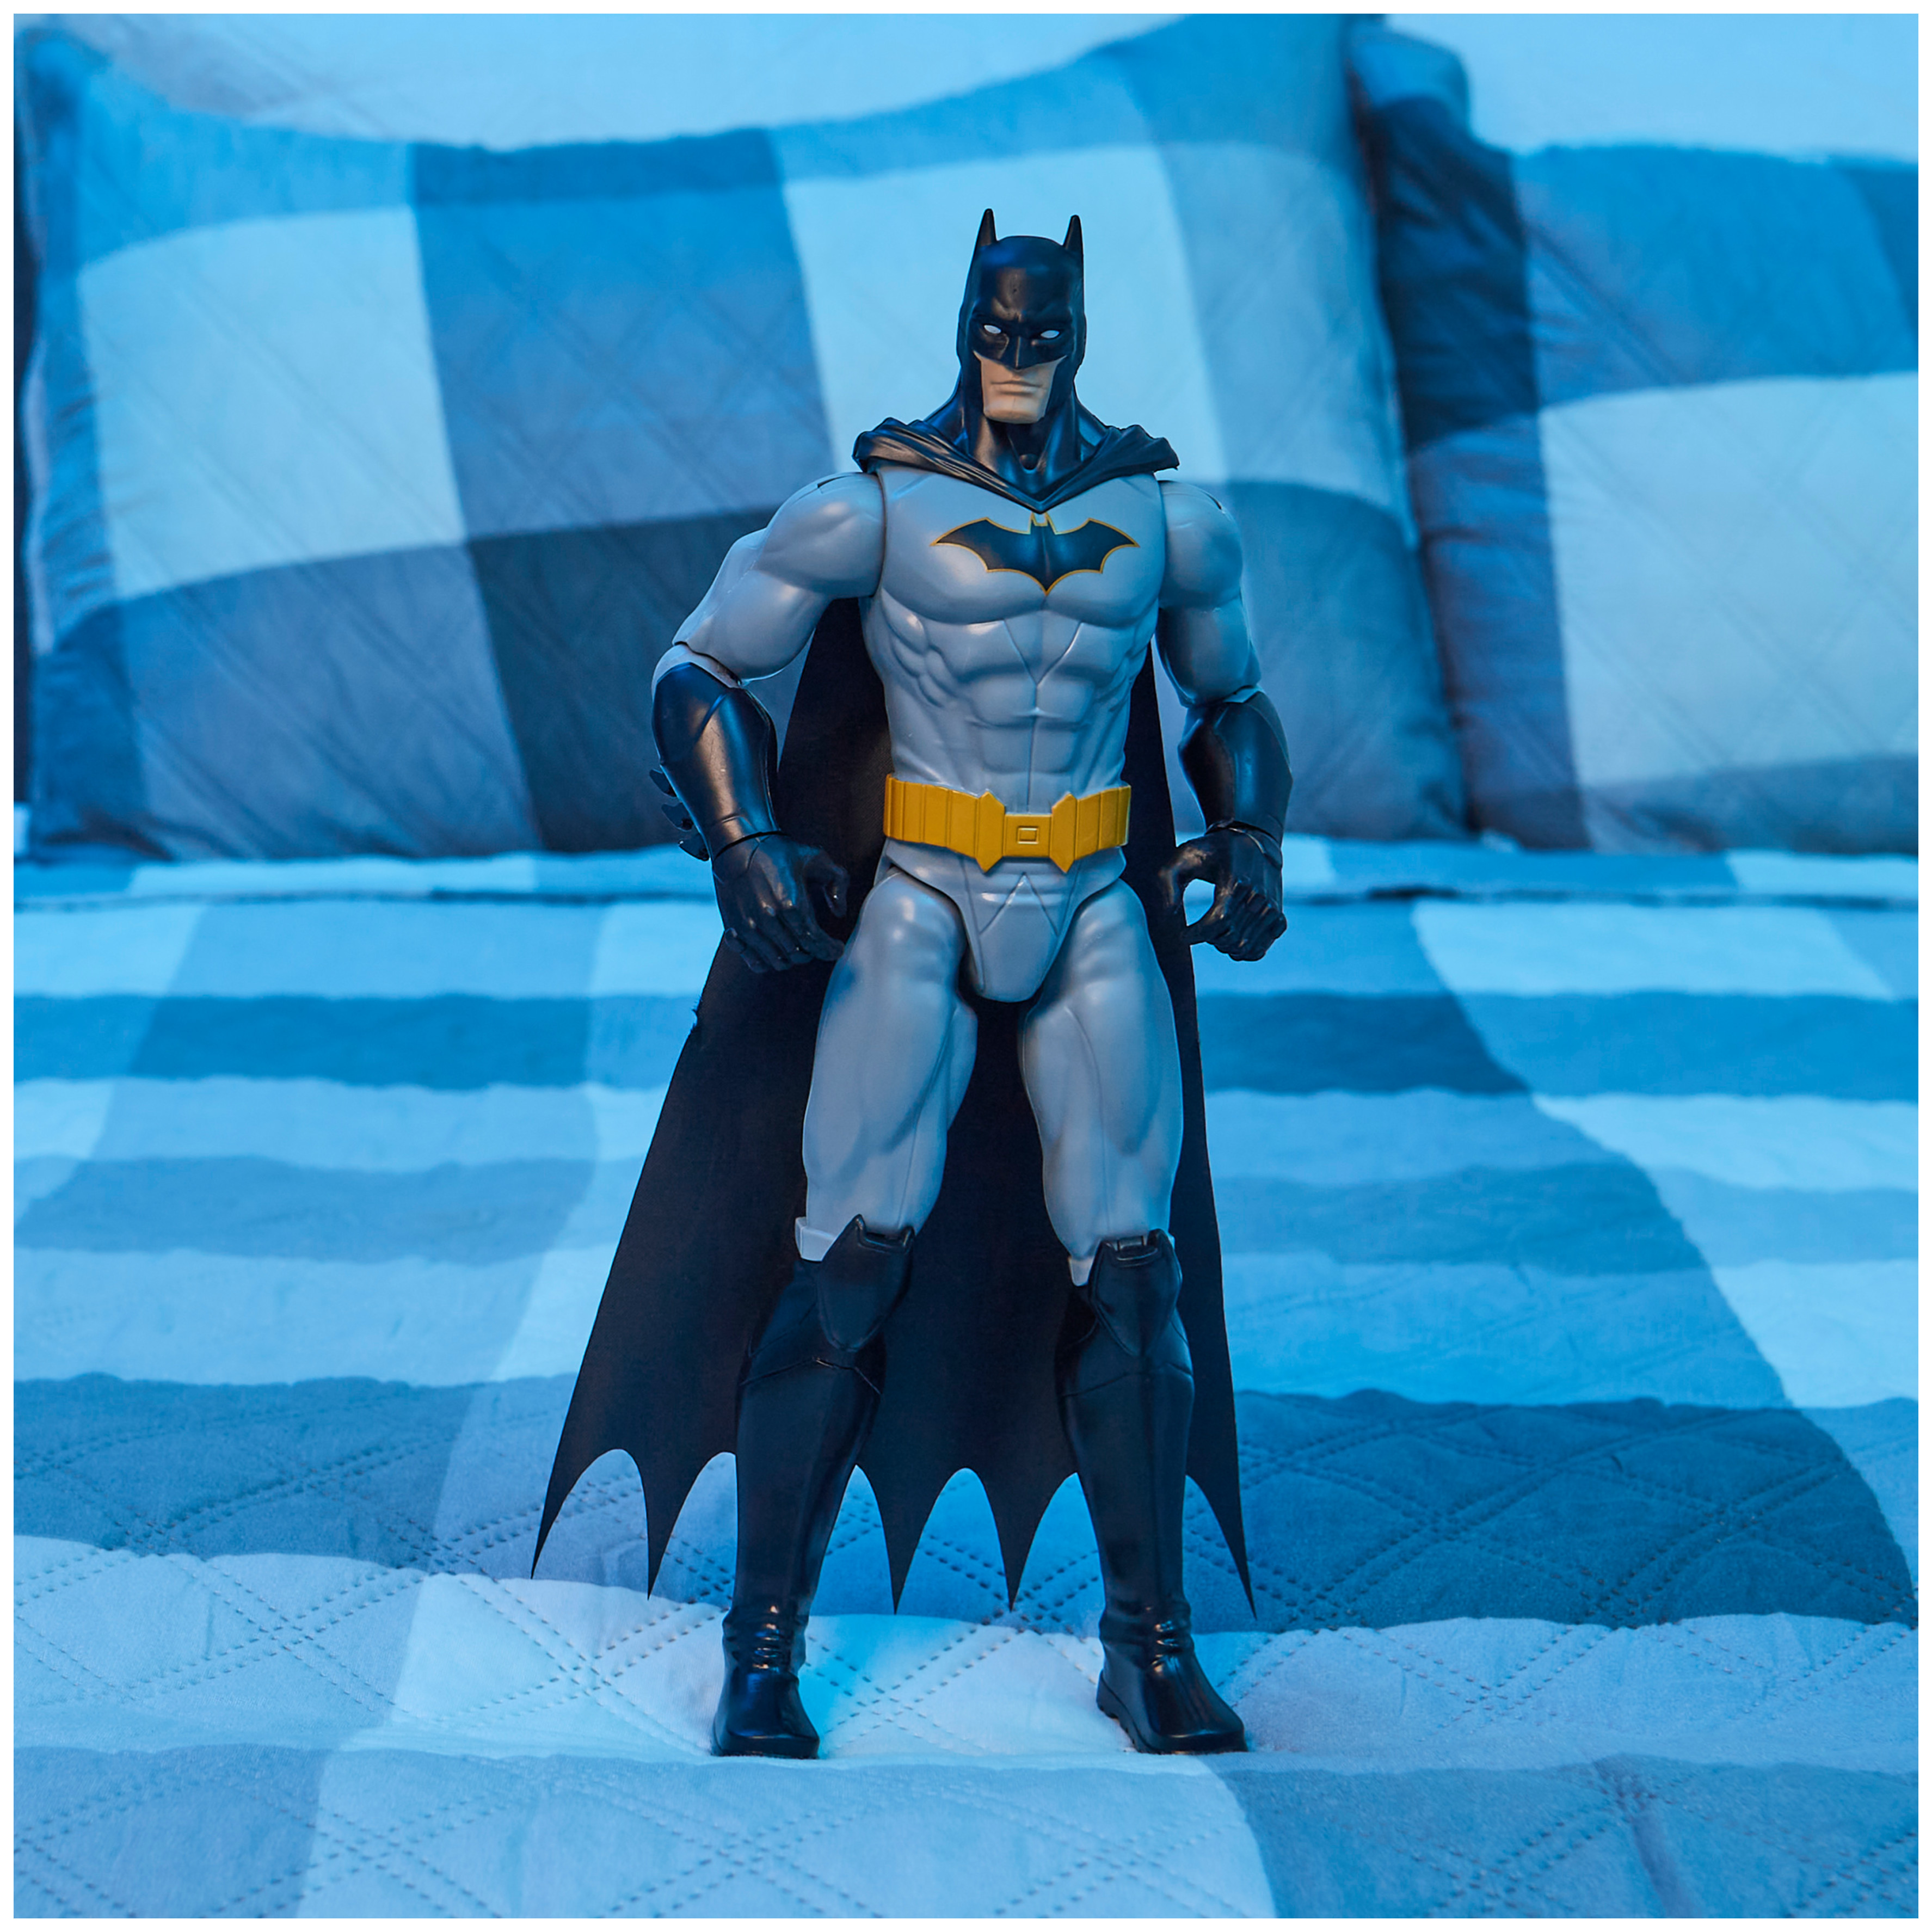 Batman 12-inch Rebirth Action Figure, Kids Toys for Boys Aged 3 and up - image 3 of 7